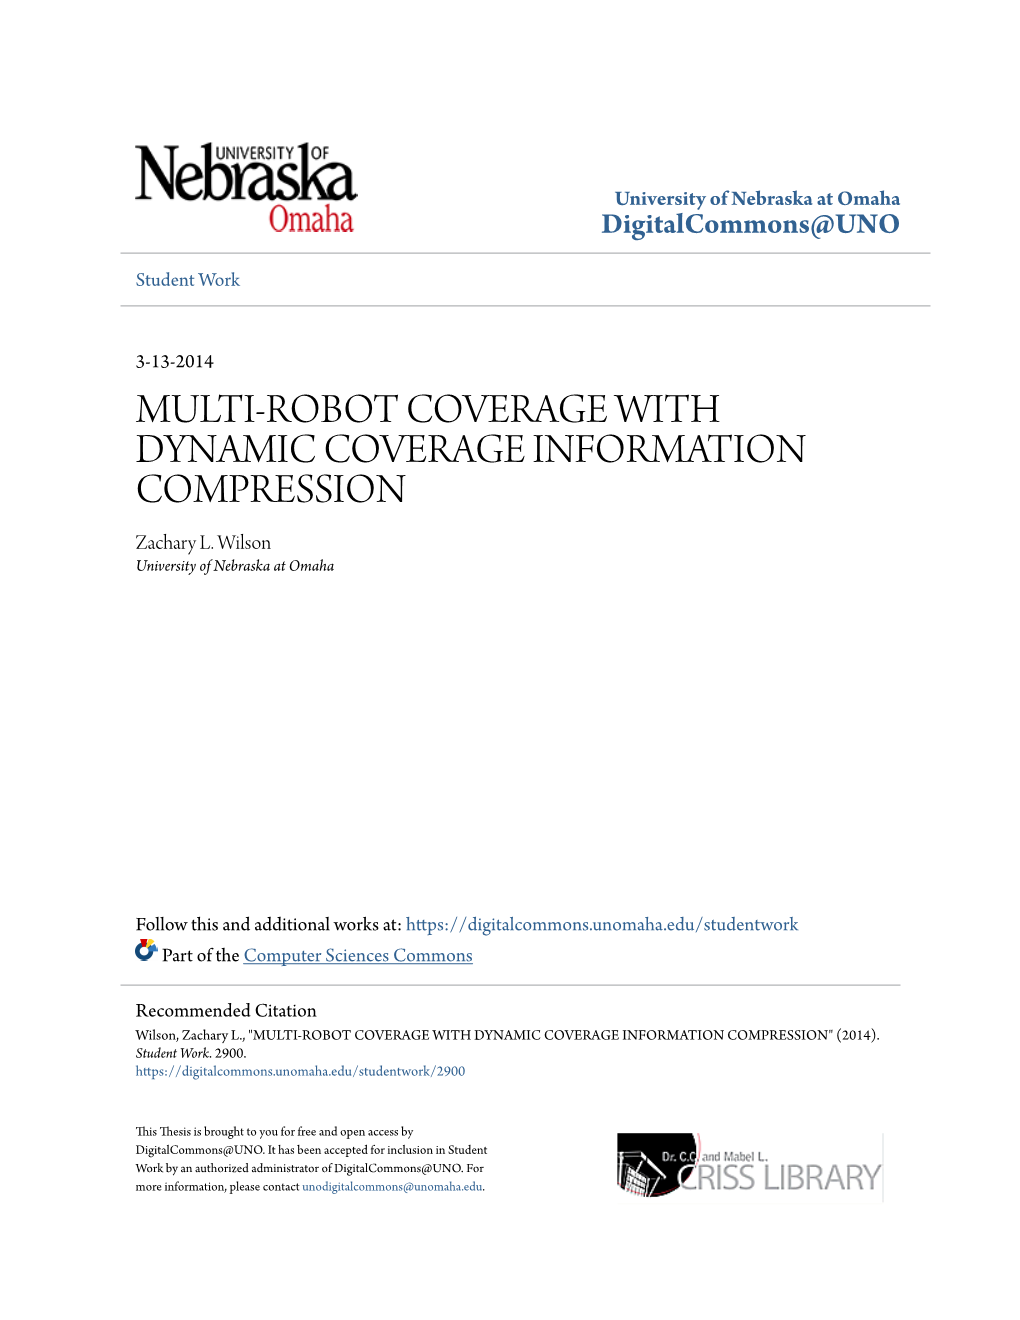 MULTI-ROBOT COVERAGE with DYNAMIC COVERAGE INFORMATION COMPRESSION Zachary L